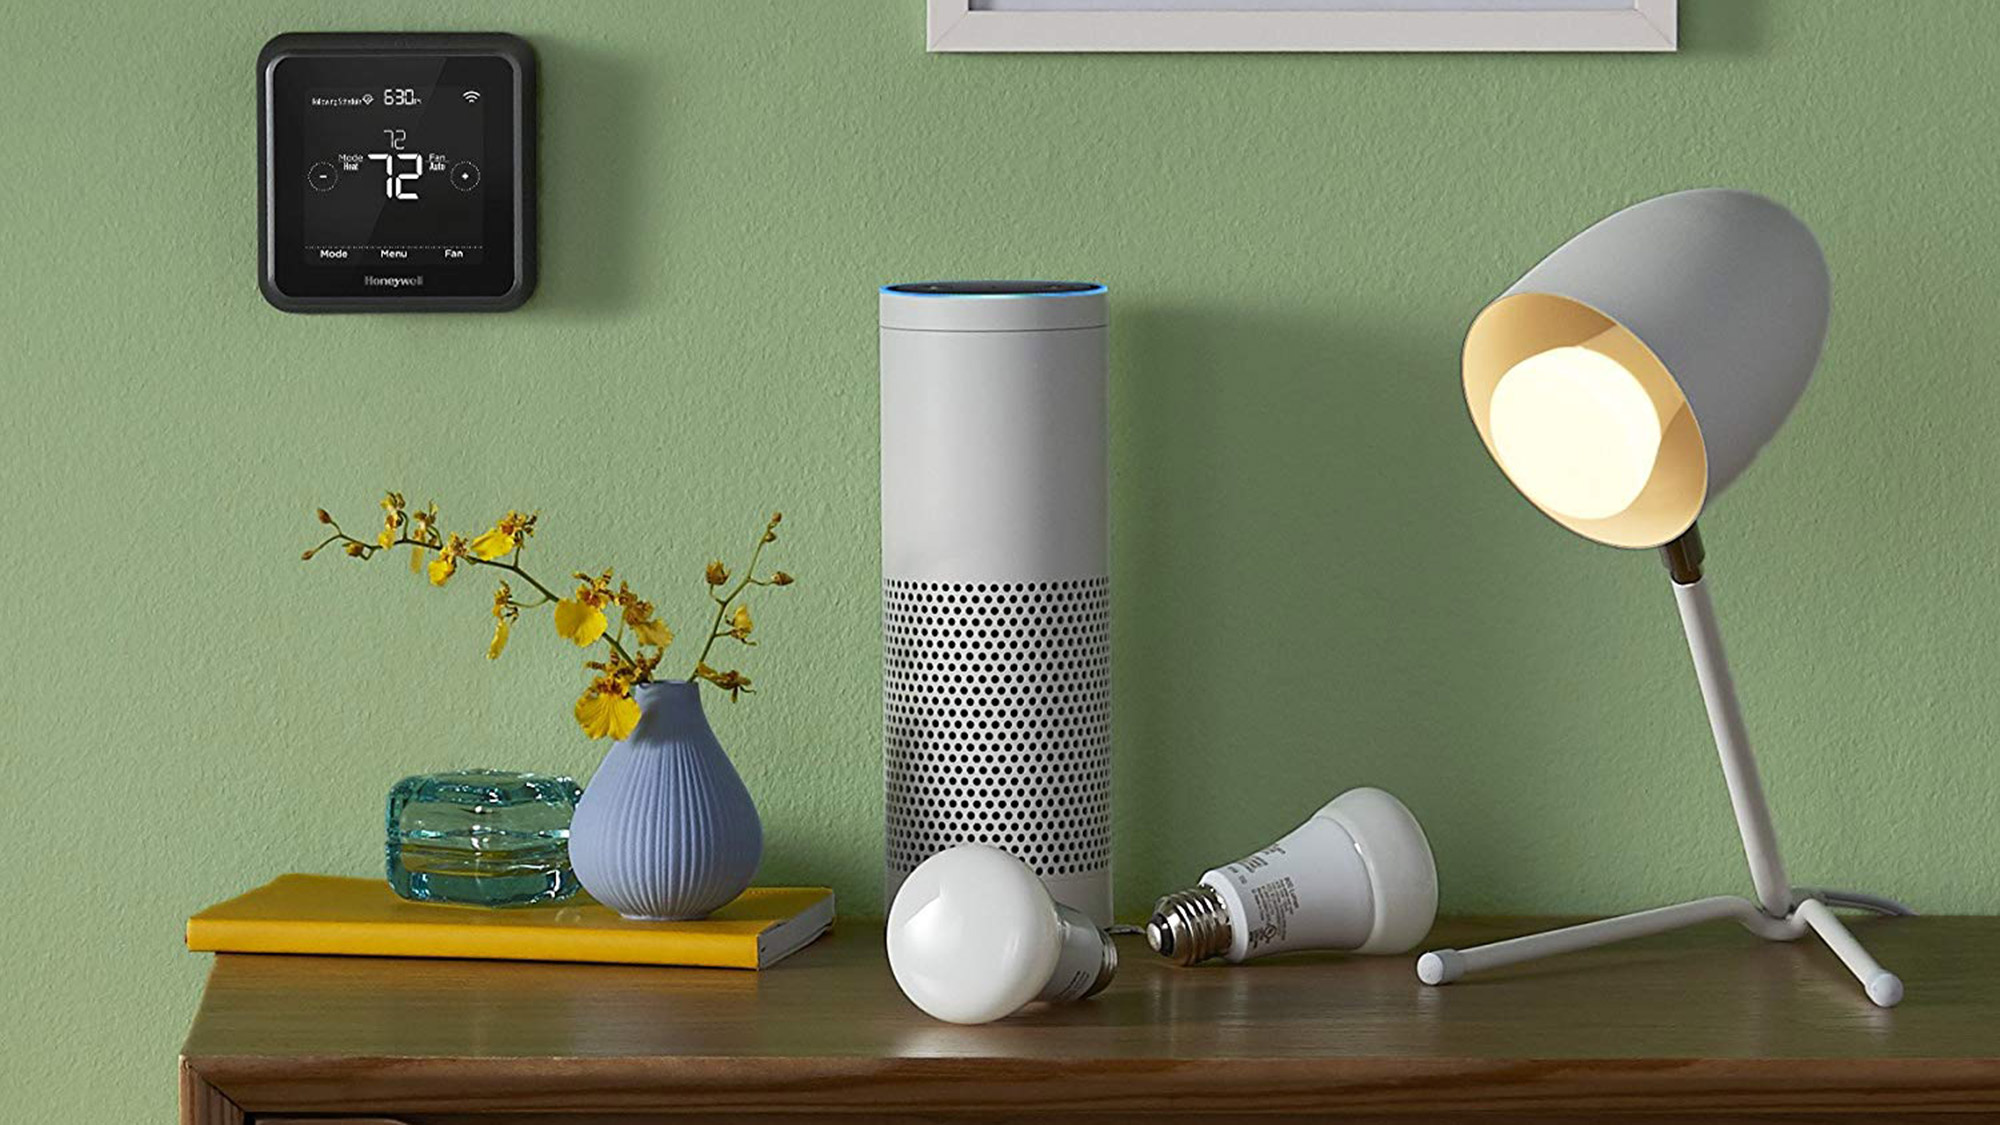 The best nest-compatible products: Philips Hue White and Color Ambiance